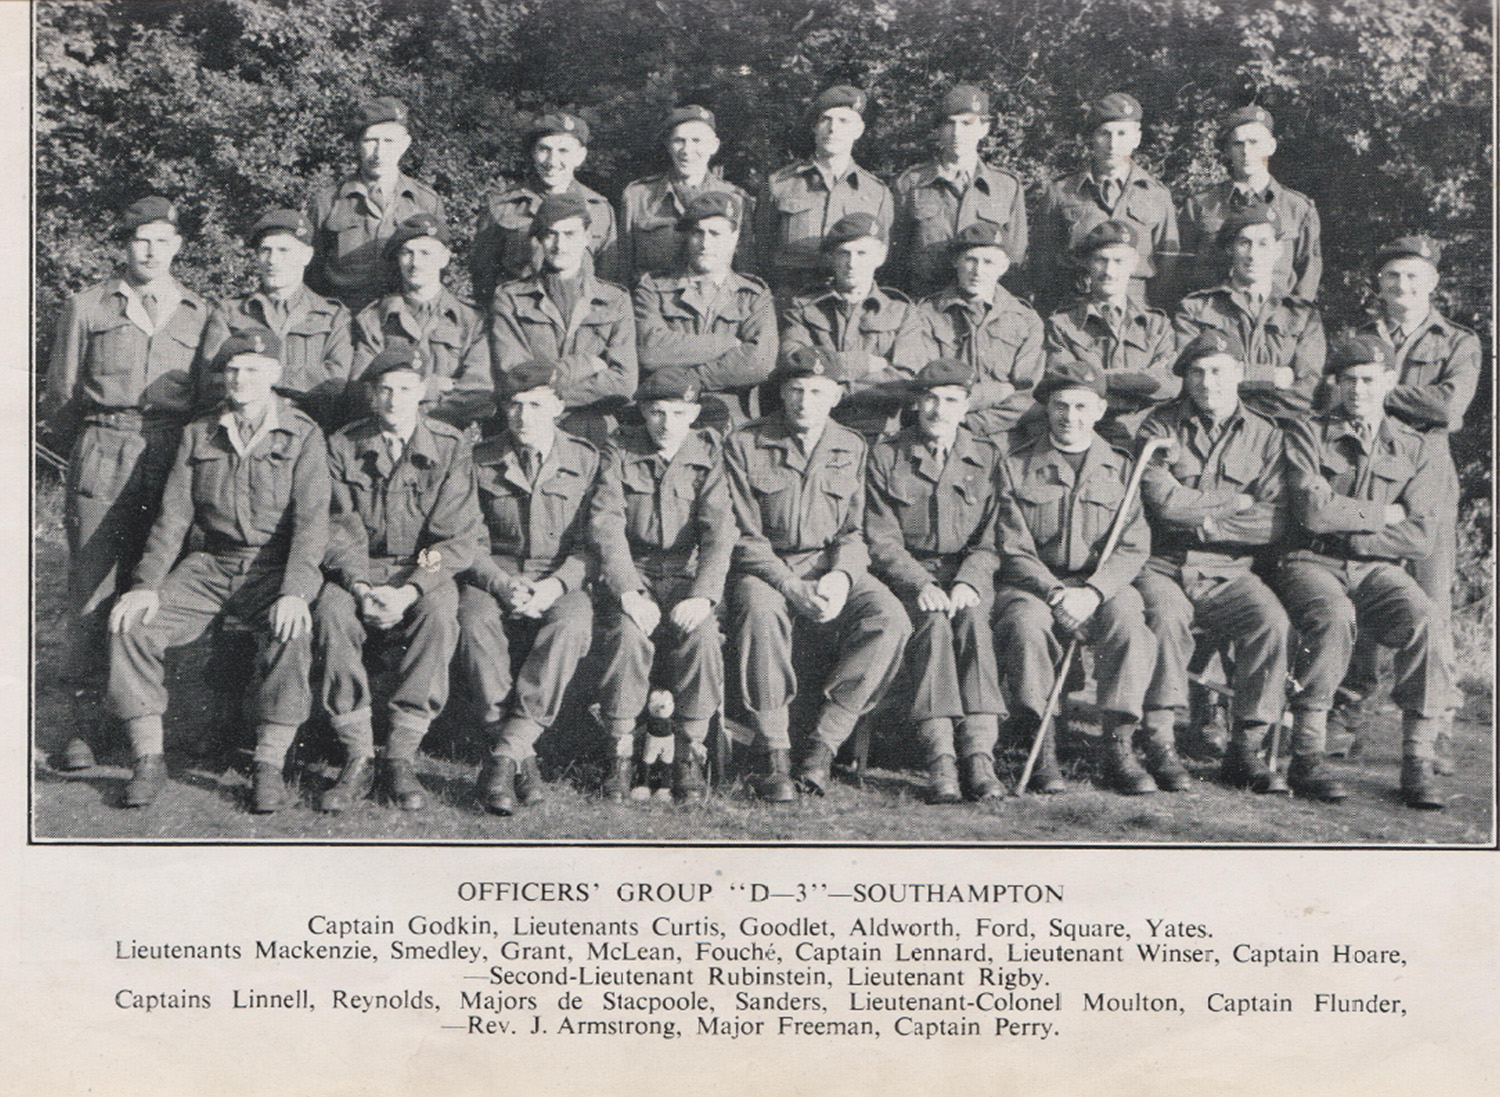 48 RM Commando Officers 1944 nine of whom were later killed in action